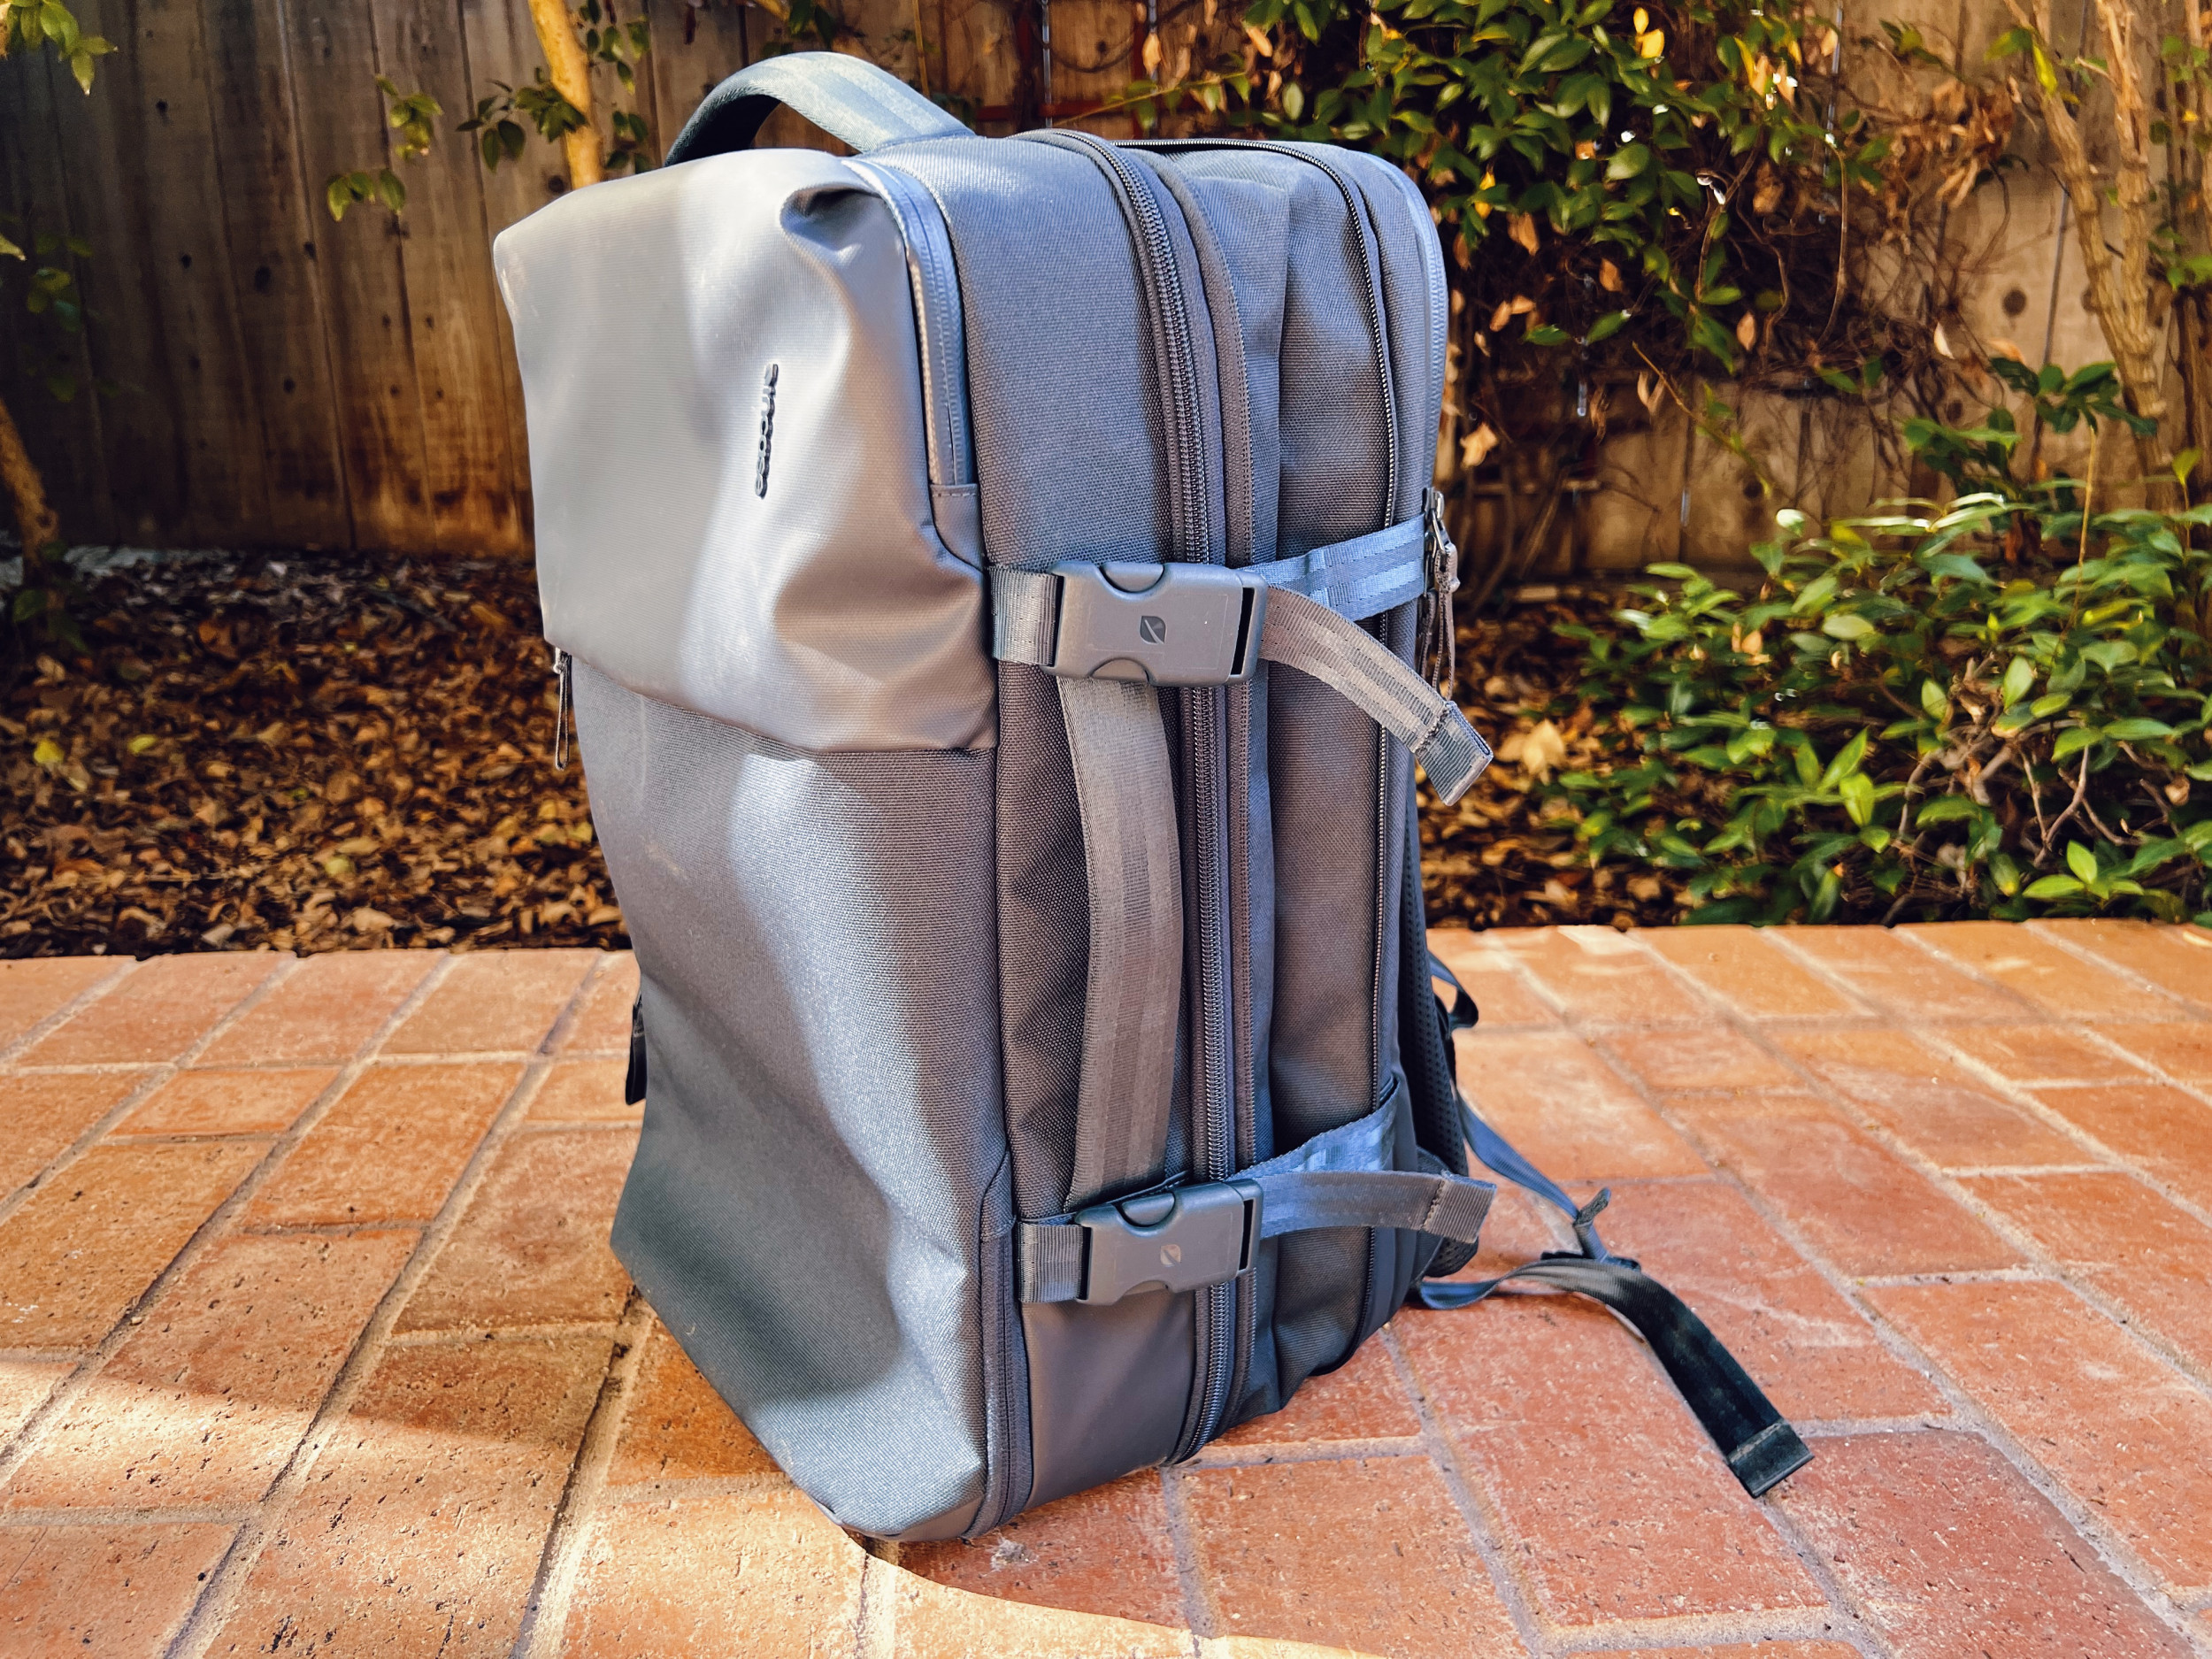 New Incase A.R.C. Travel Bags Can Go Anywhere and Do It in Style